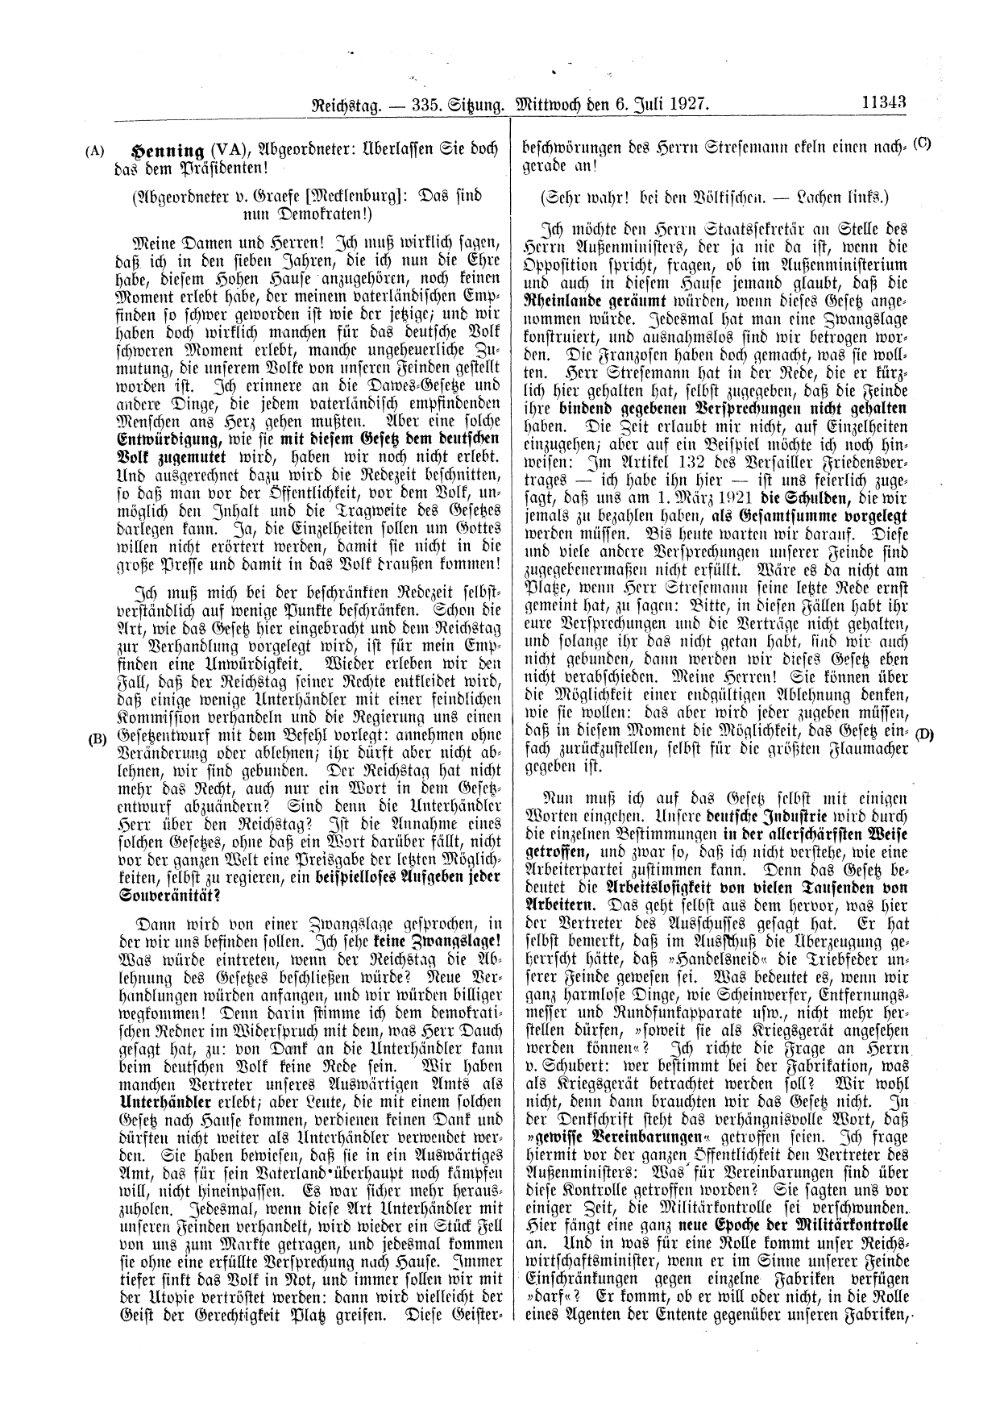 Scan of page 11343